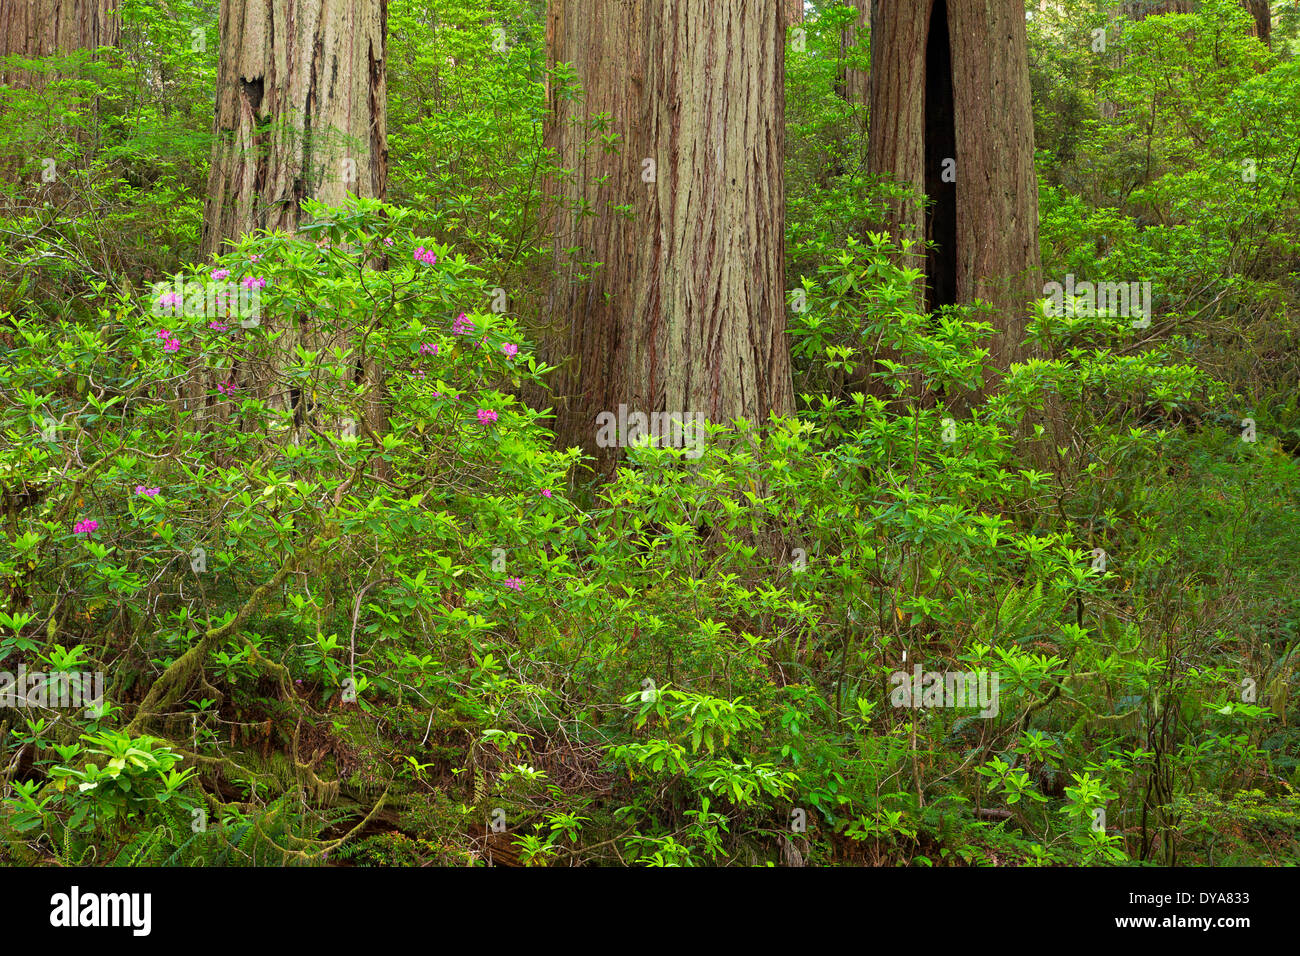 CA California USA America United States Redwood National Park Redwoods Redwood forest Sequoia sempervirens forest tree trees, Stock Photo